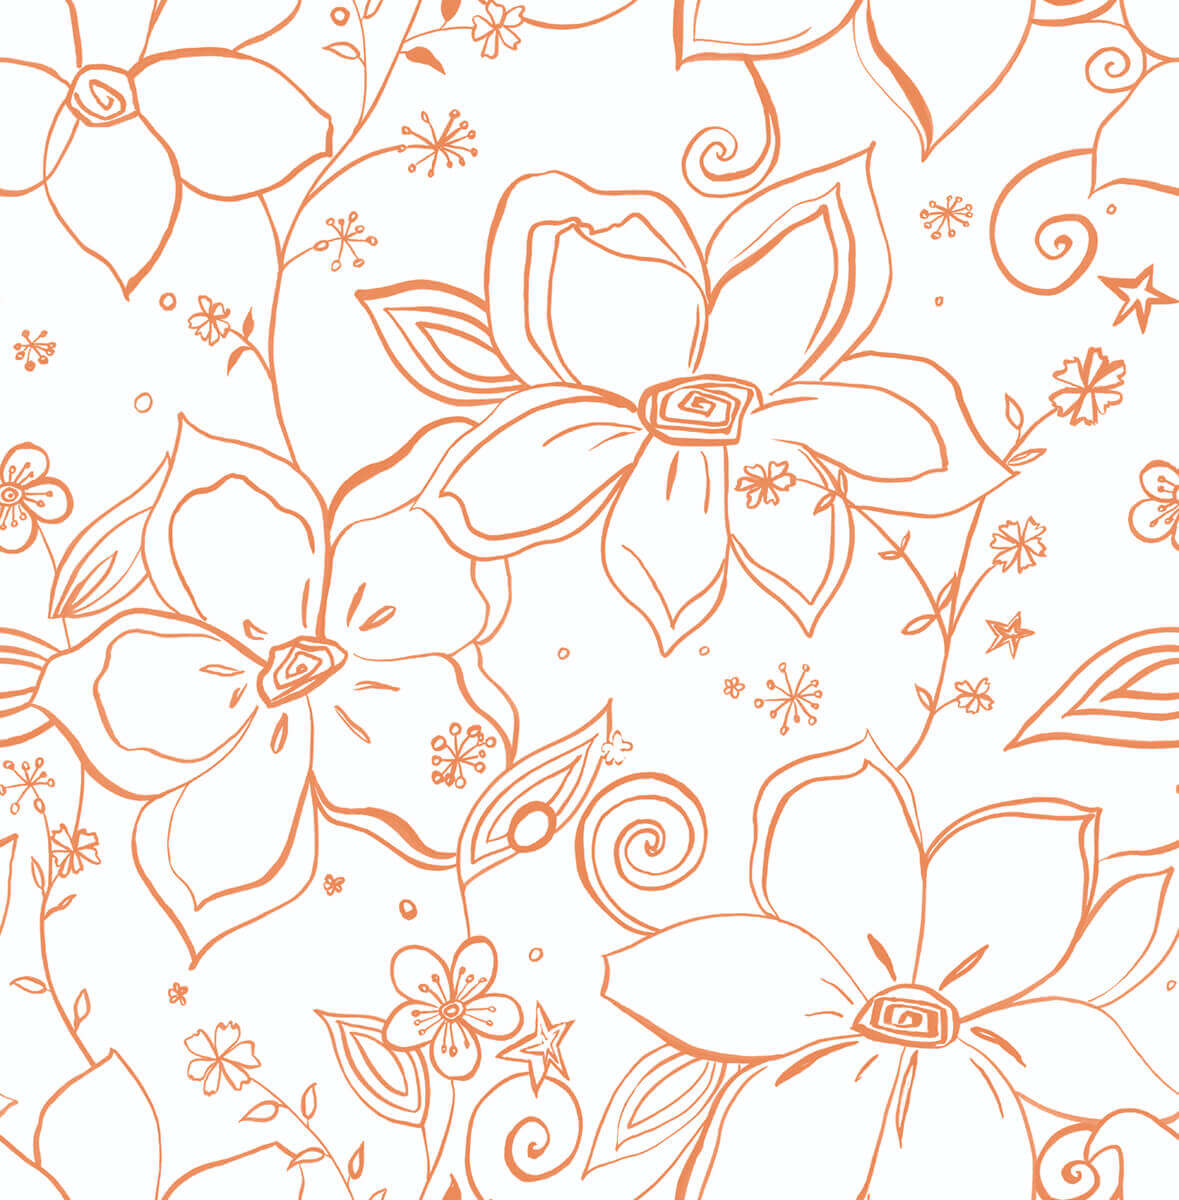 NextWall Floral Peel and Stick Wallpaper - SAMPLE